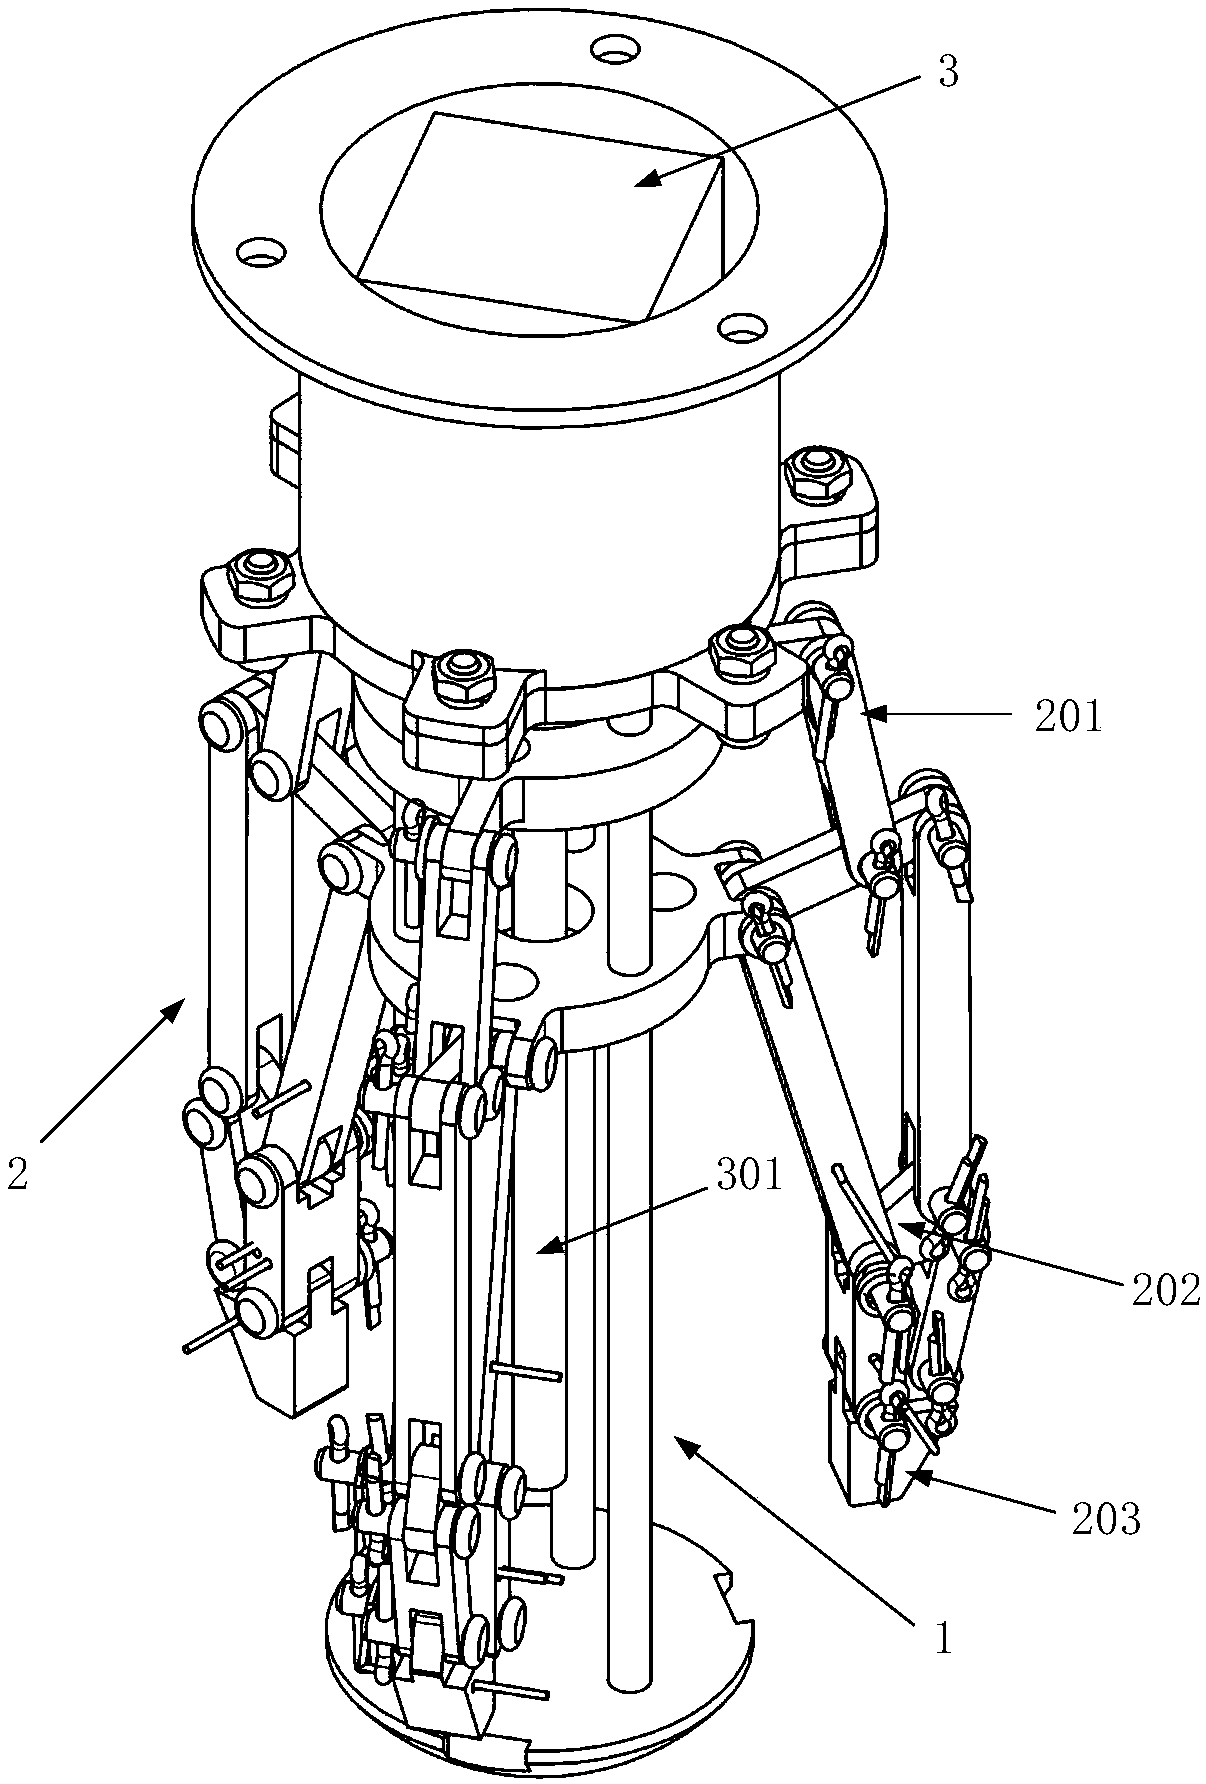 Mechanical foot for multi-foot robot